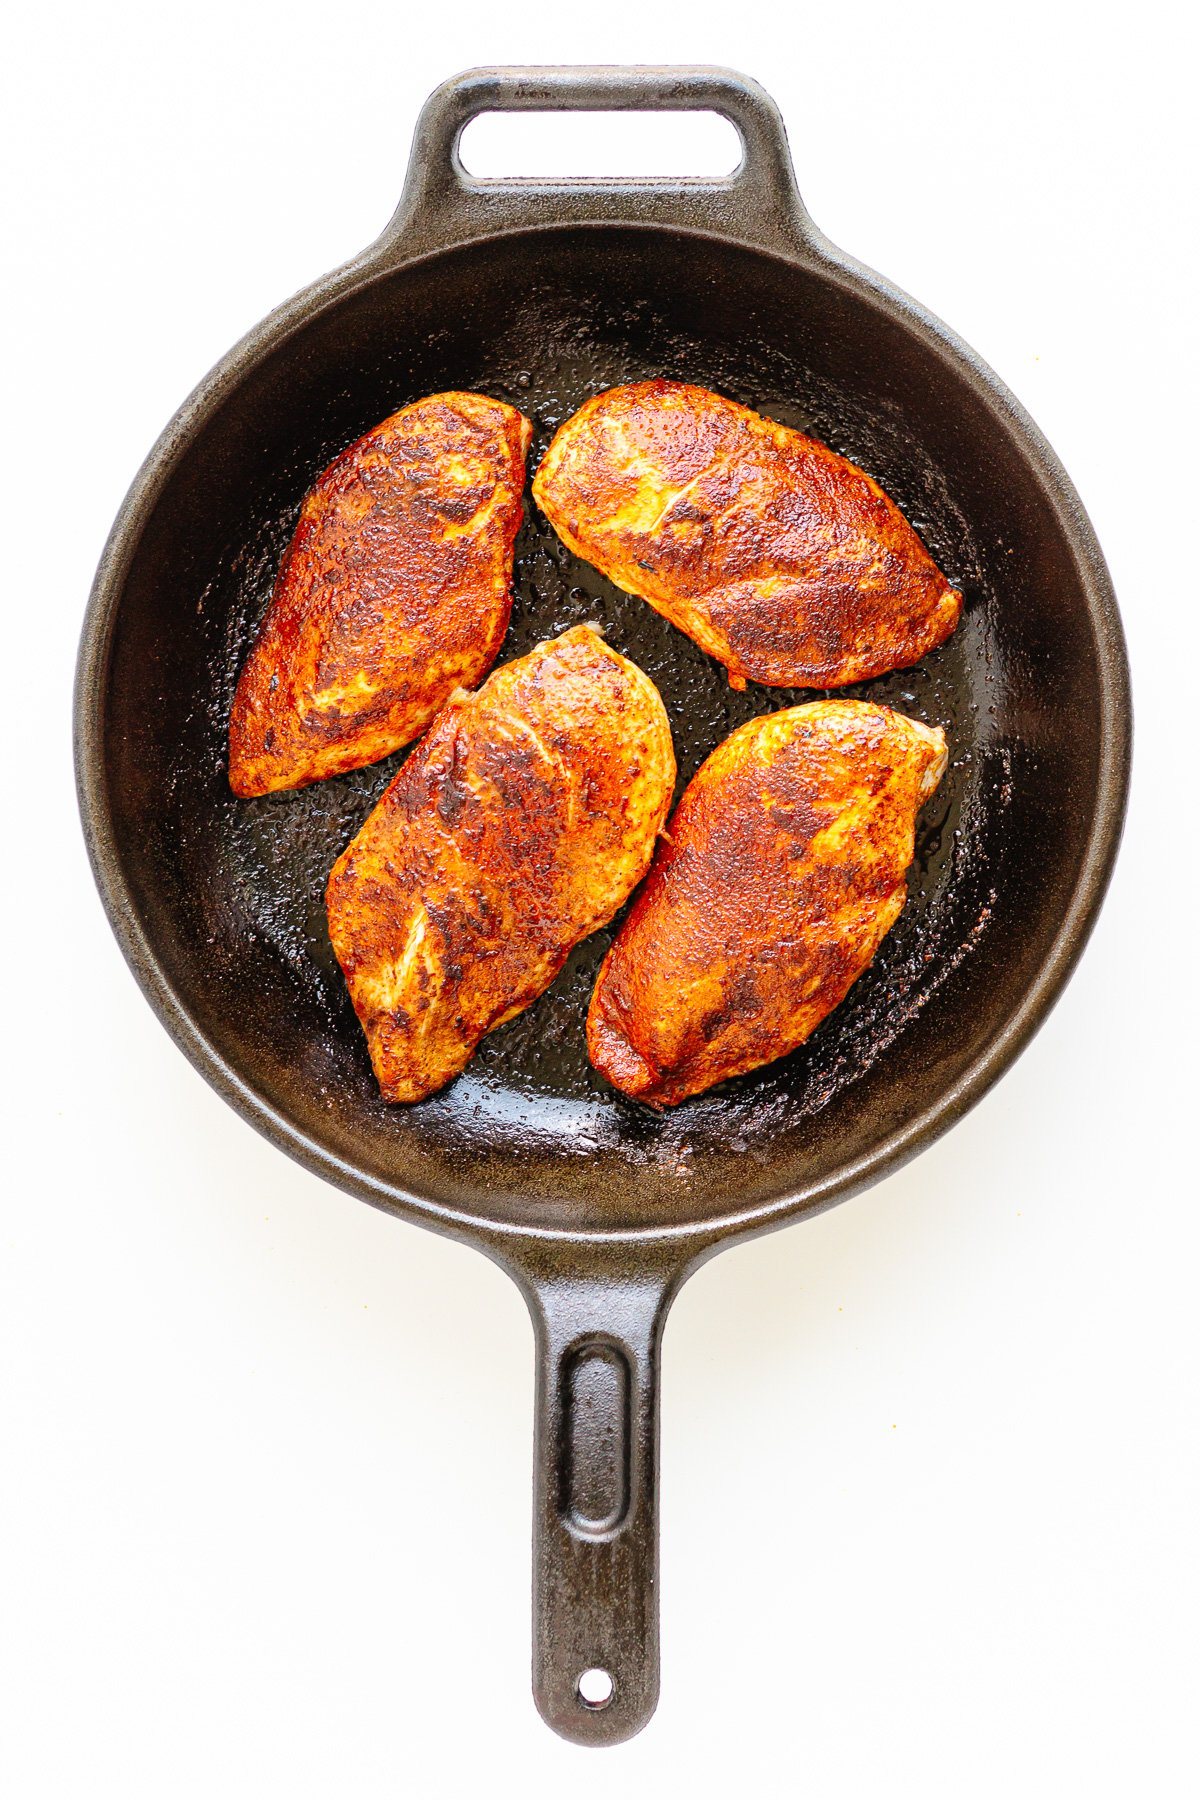 Four seared chicken breasts in a cast iron skillet.